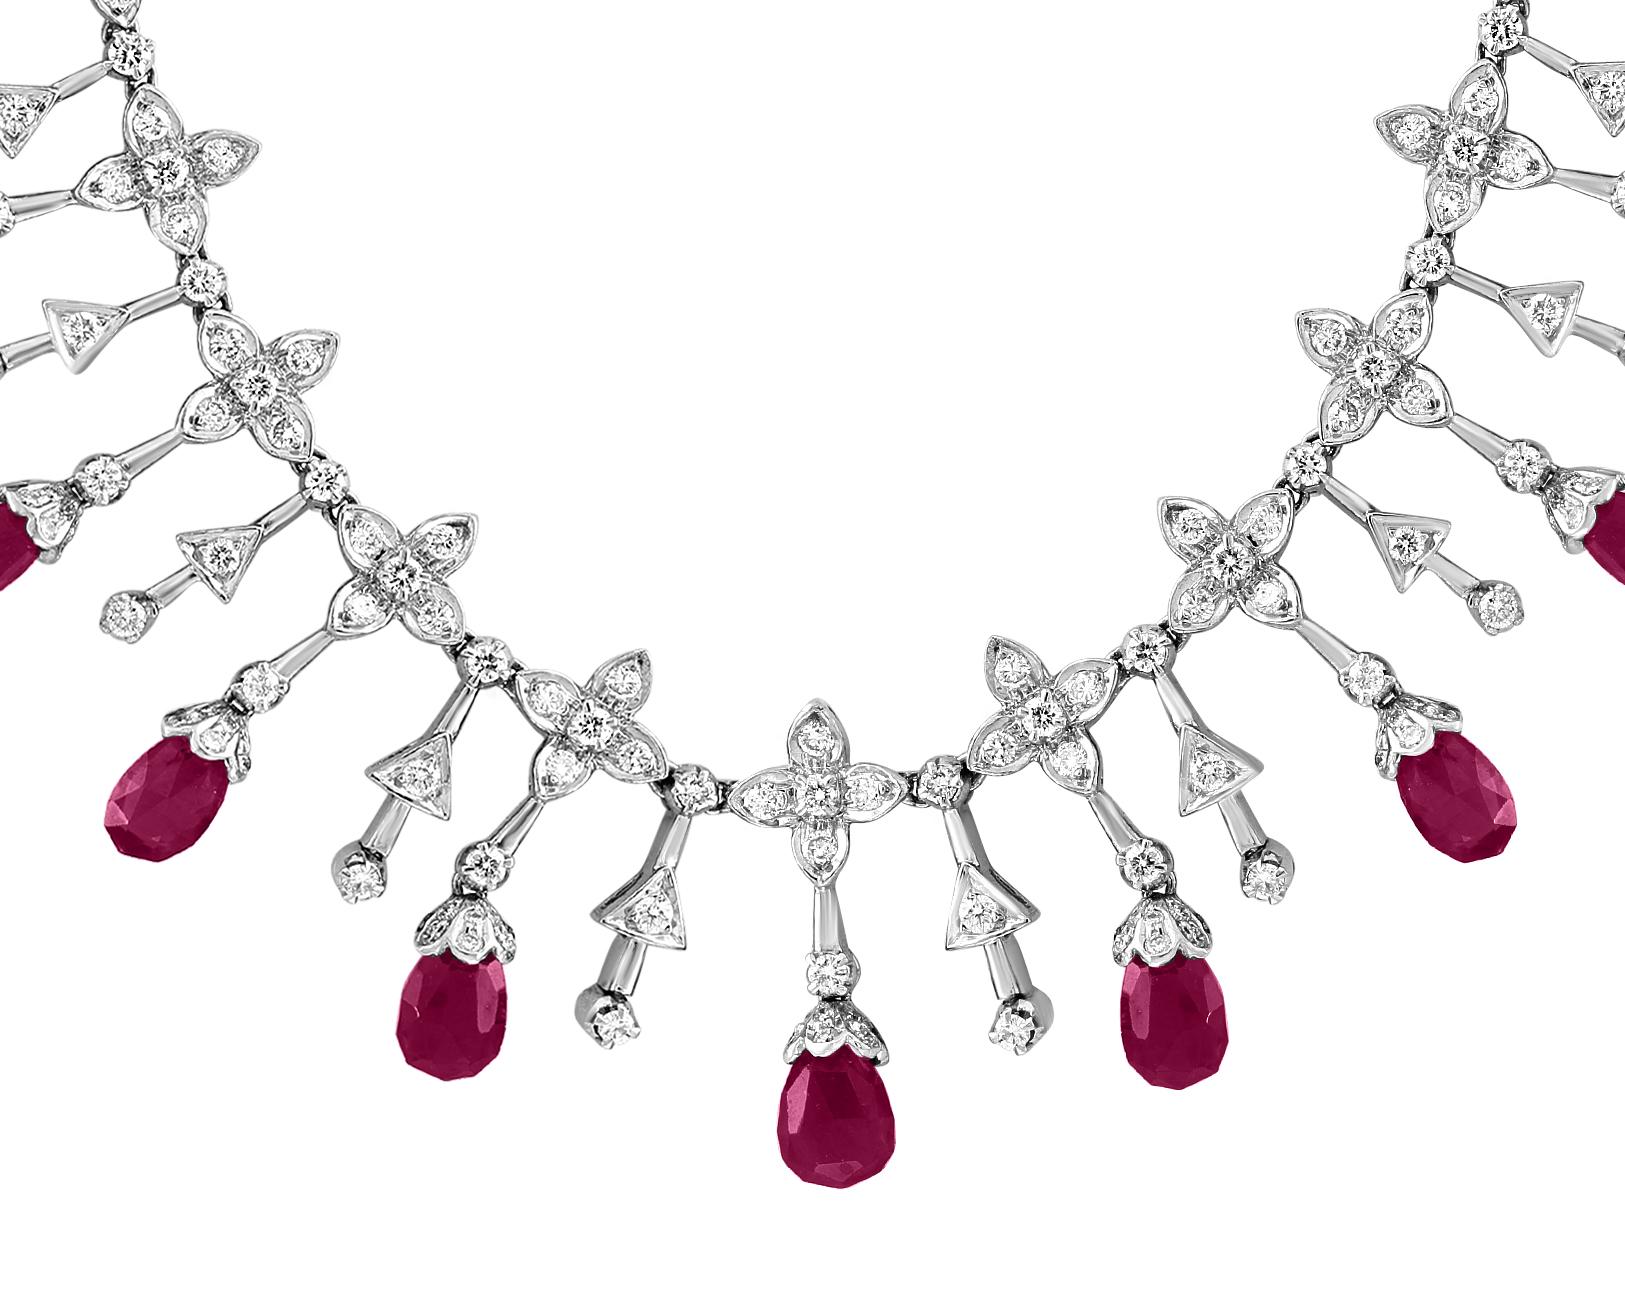    Ruby  Briolettes and Diamond Necklace in 18 Karat Gold 
This spectacular Necklace  consisting of 13 Briolettes  of  Ruby approximately  18 Carats.  The  Ruby  is surrounded by approximately 10 Carats of  brilliant cut diamonds . 
18 K gold 37